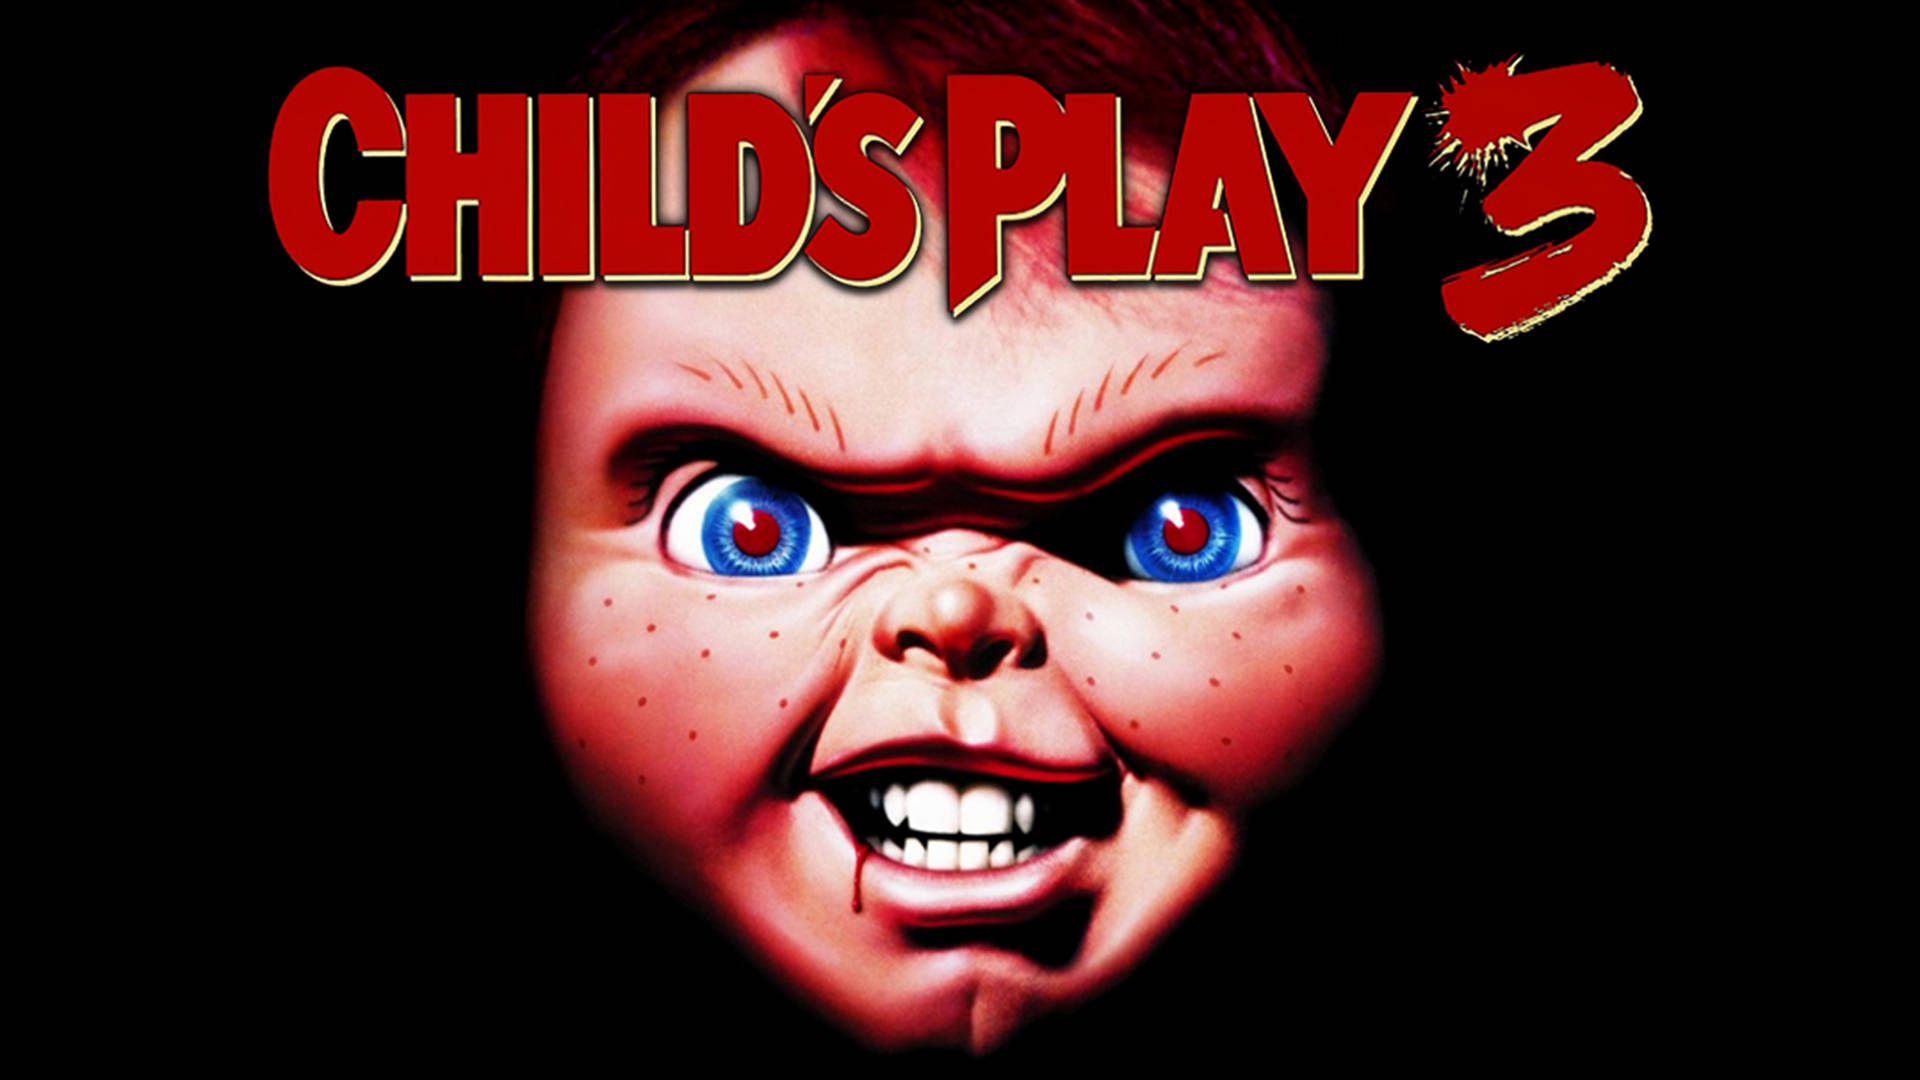 Child's Play 3 Movie Poster Wallpaper